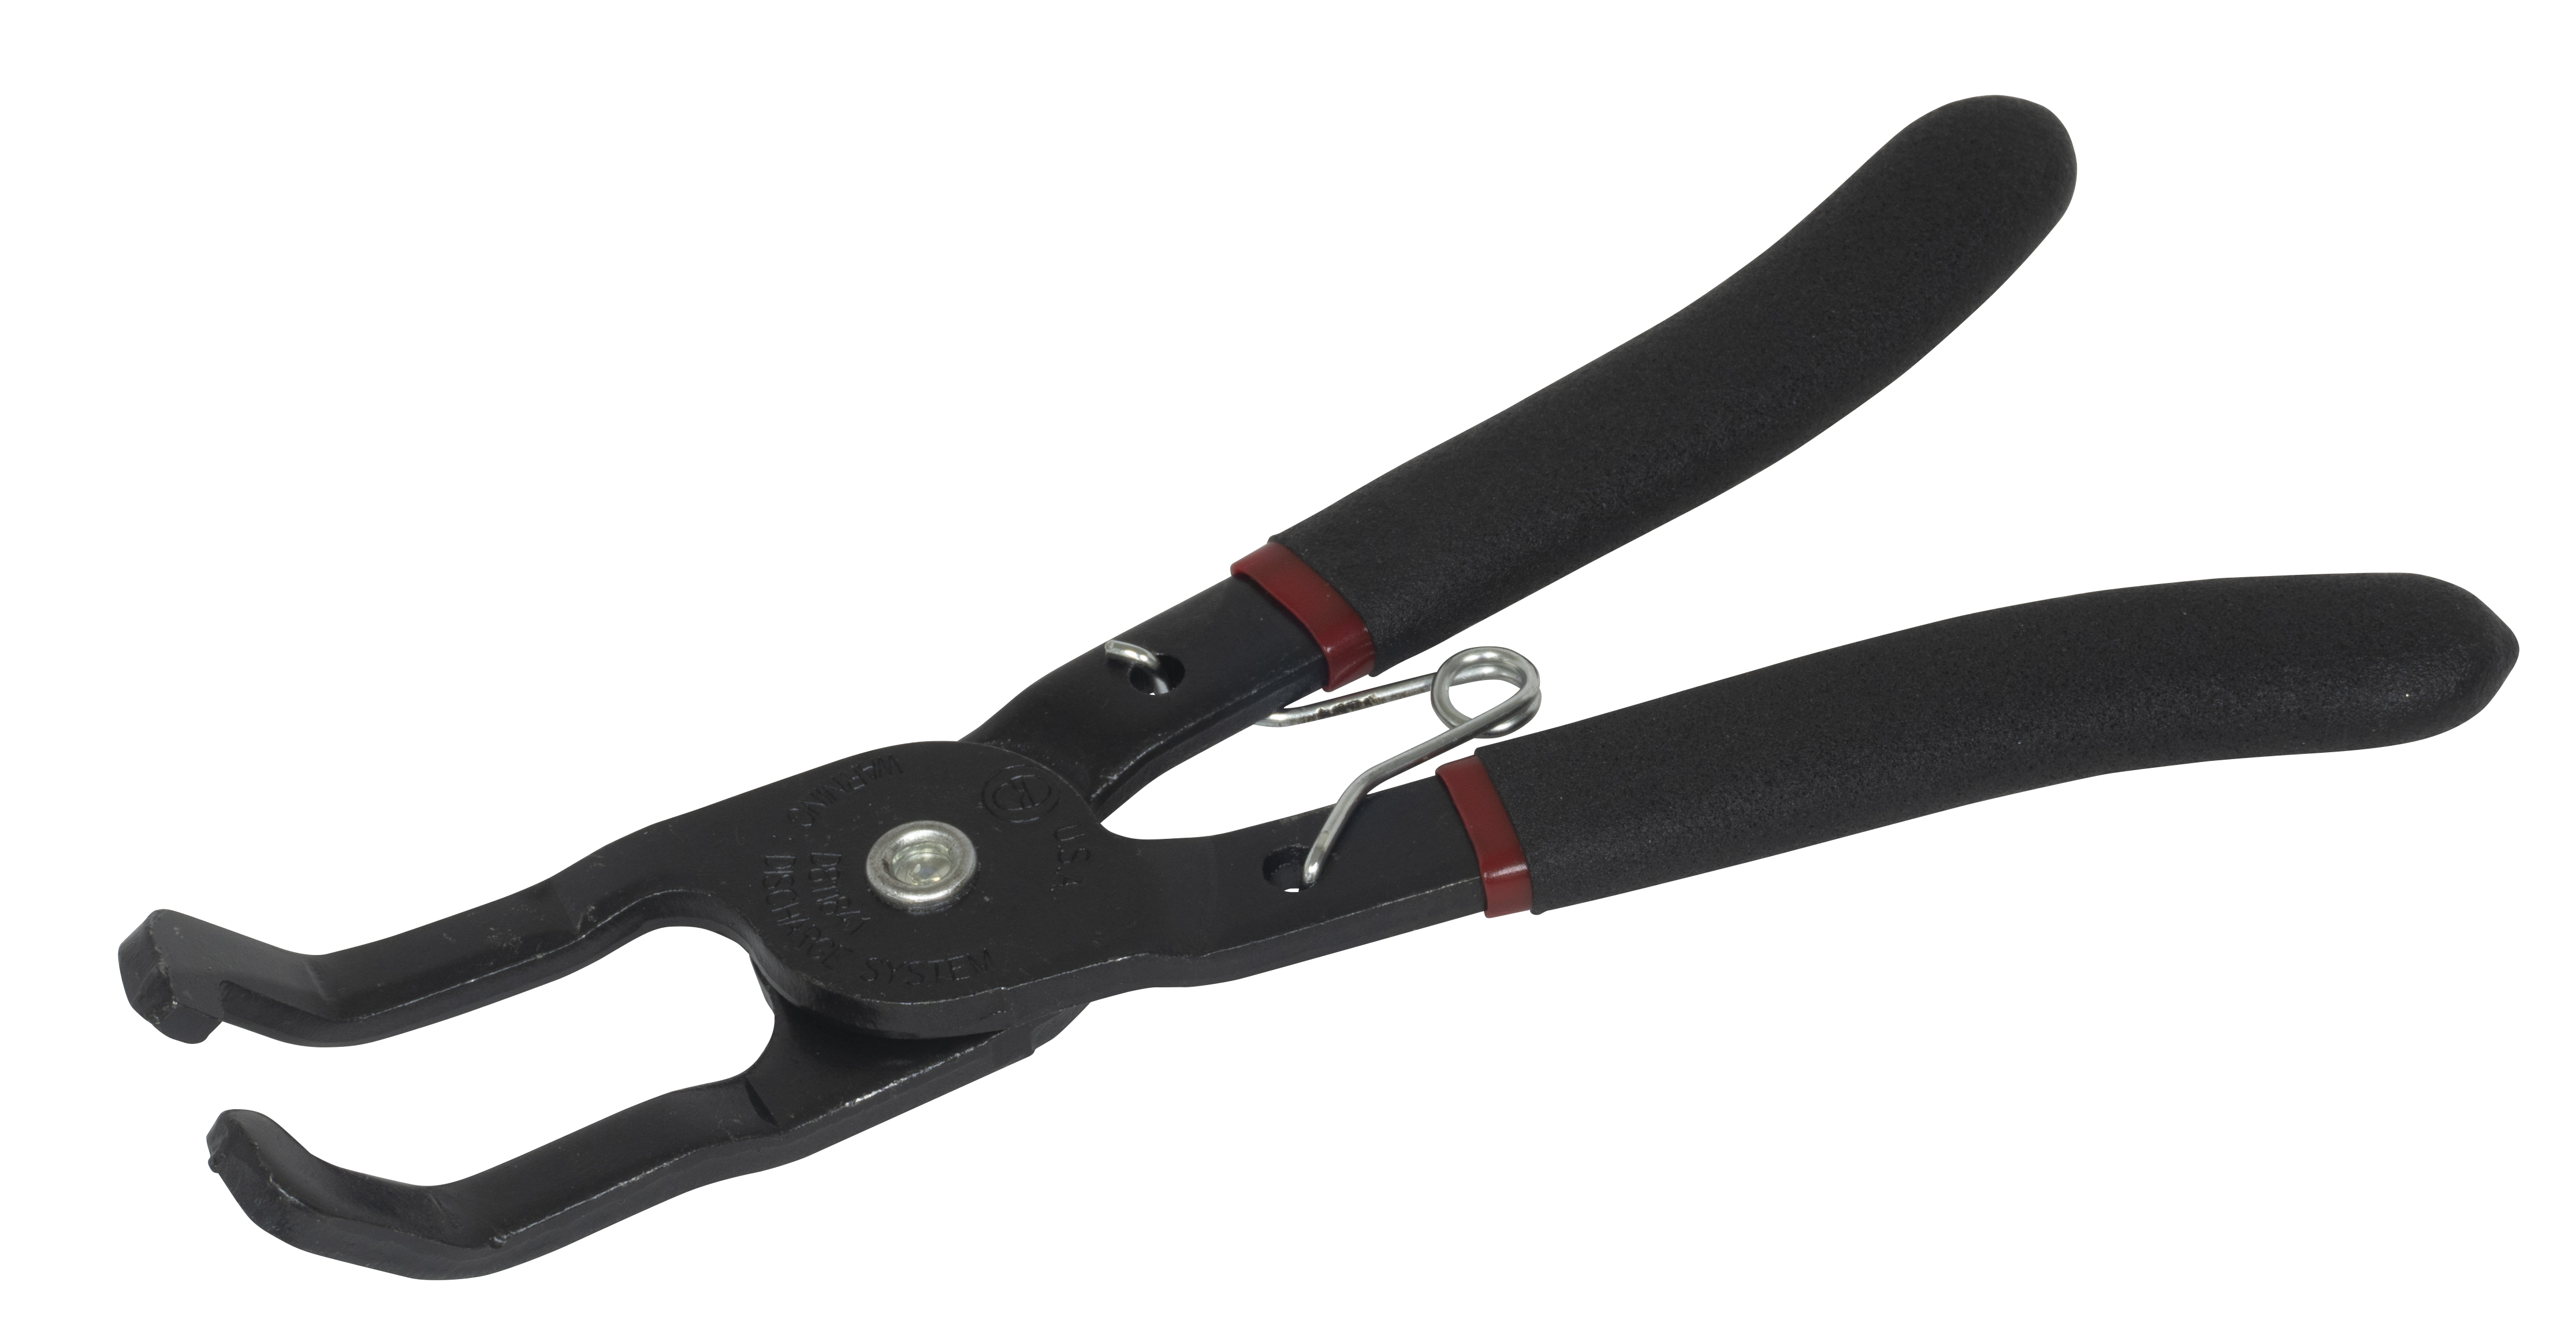 Electrical Disconnect Pliers – 50% Off